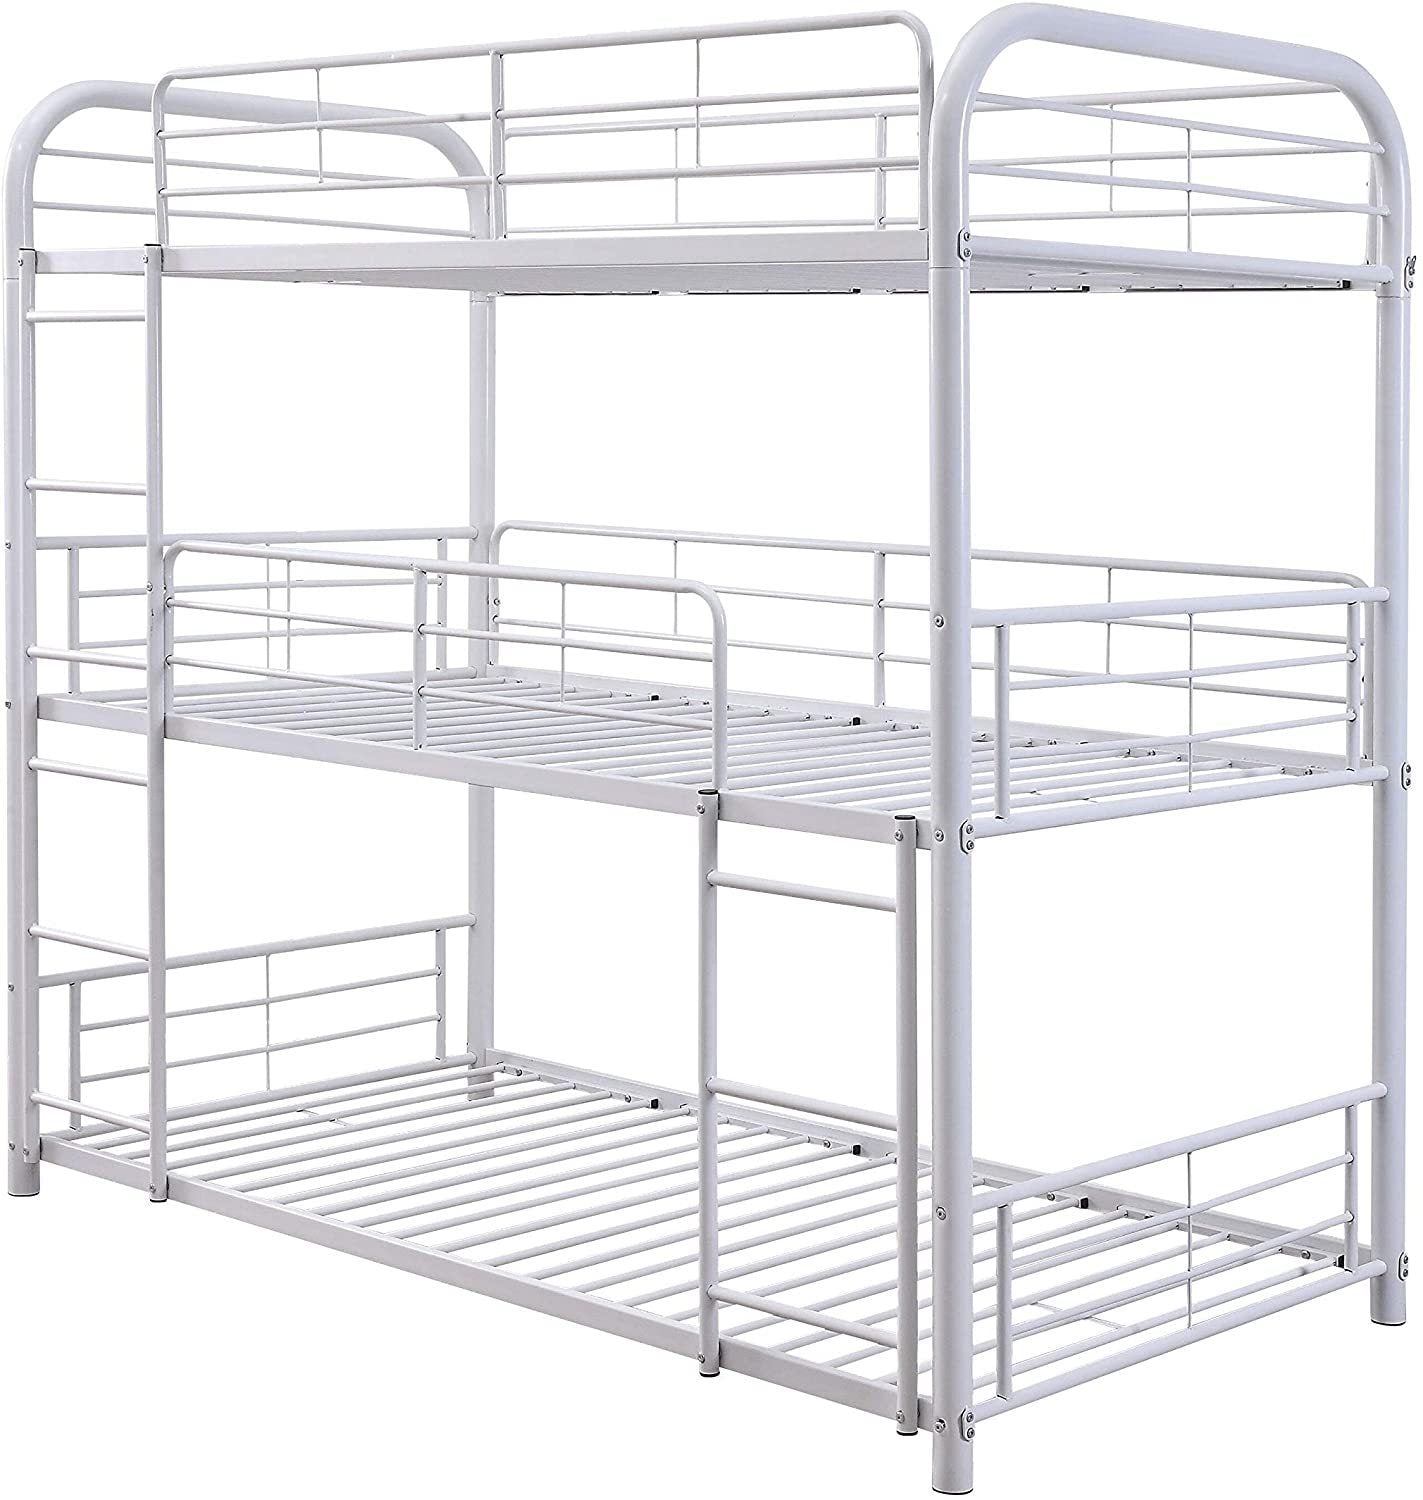 ACME Cairo Bunk Bed - Triple Twin in White 38110